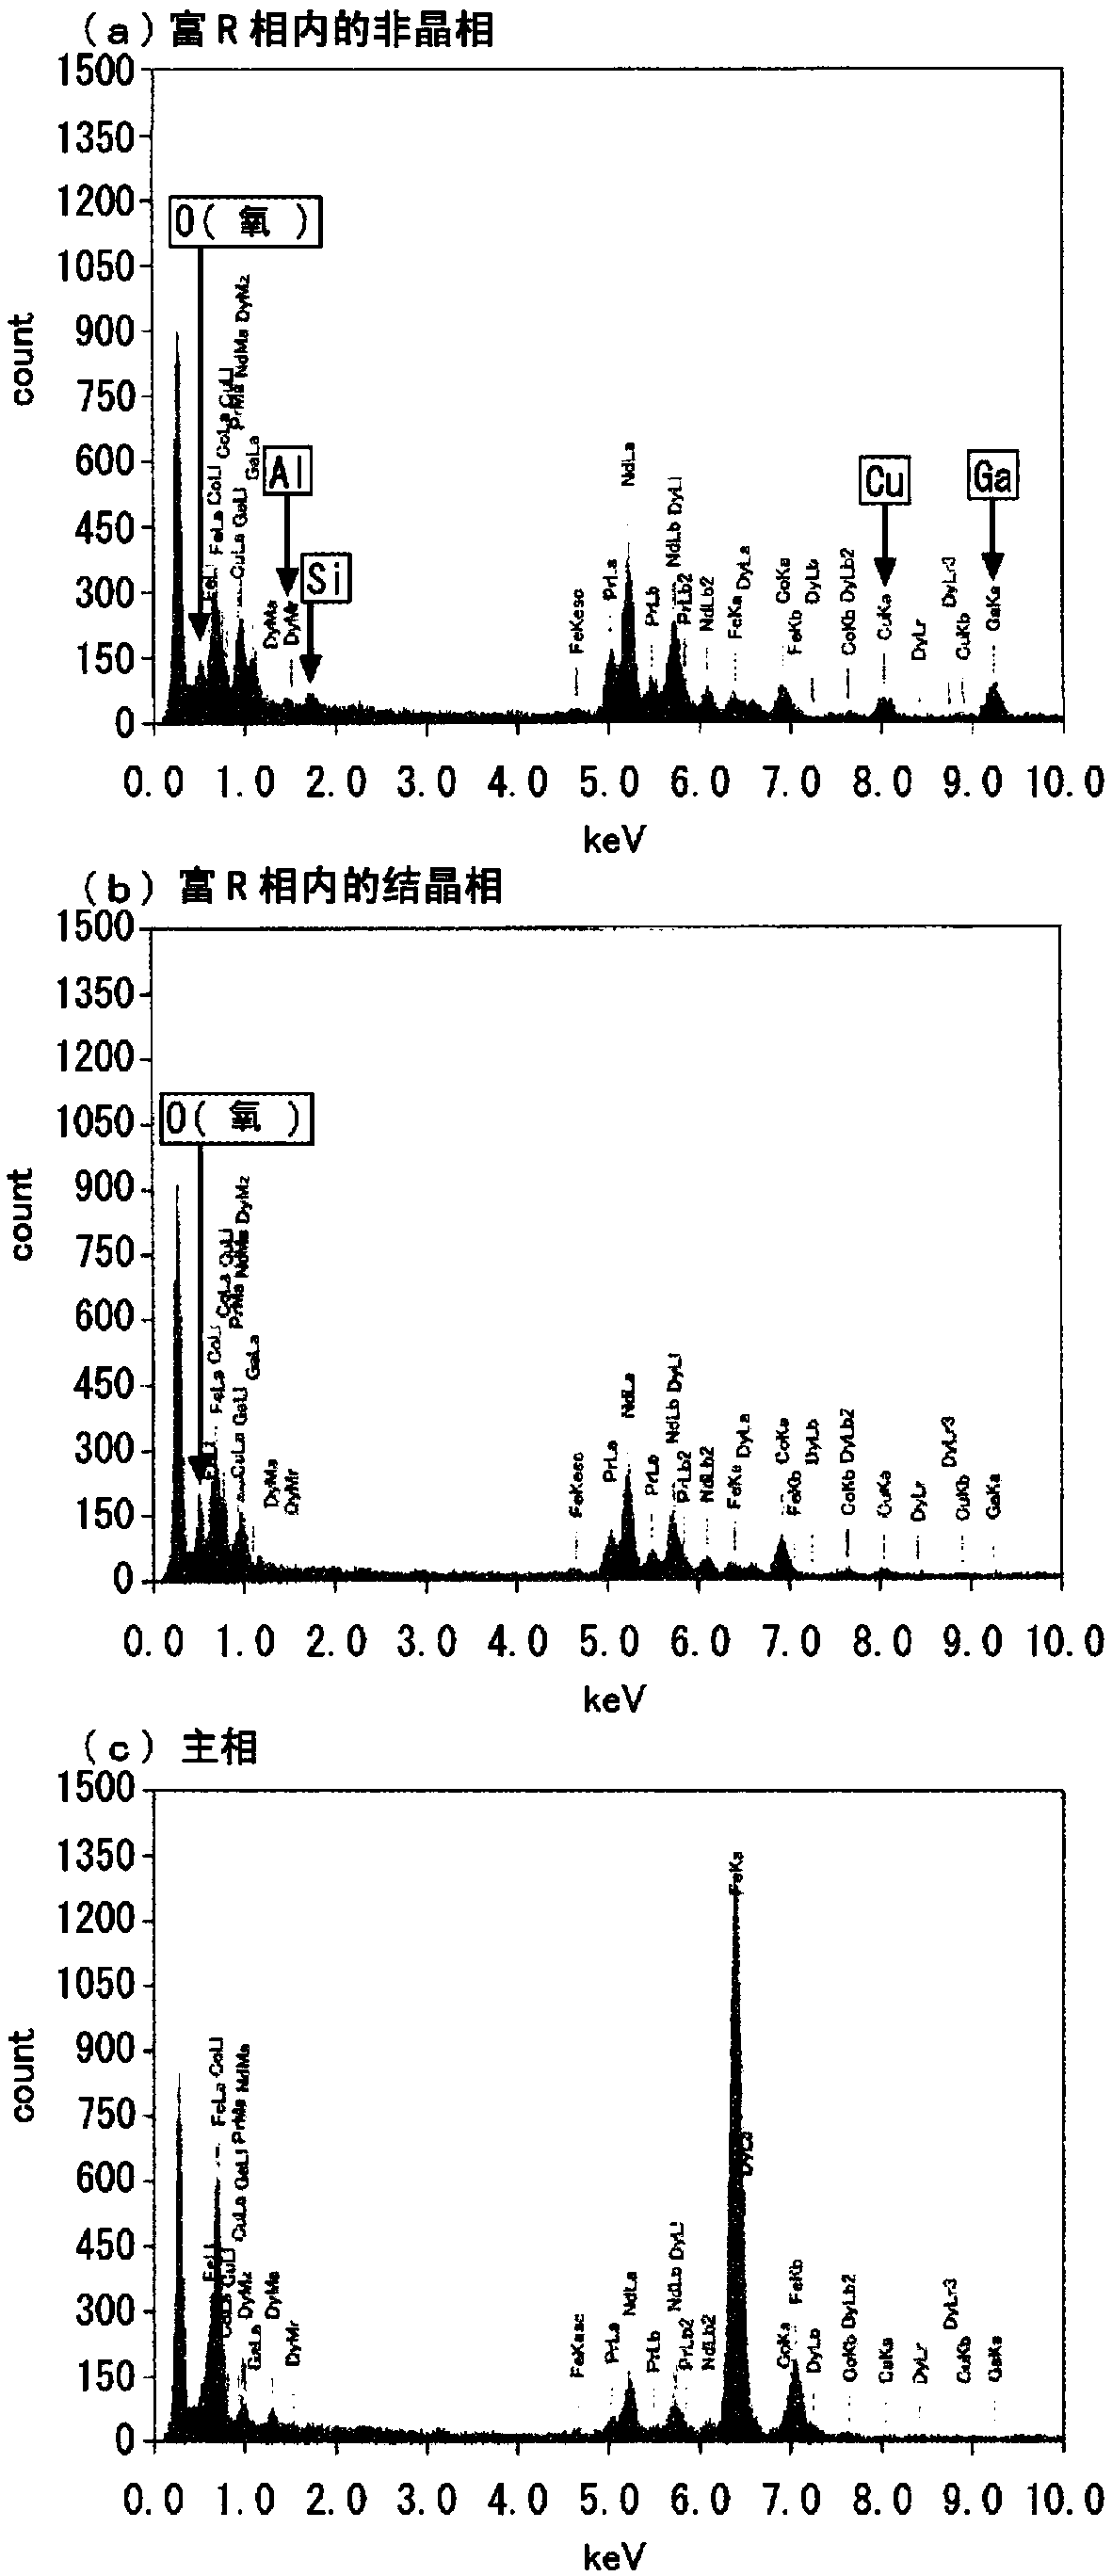 R-T-B-Ga-BASED MAGNET MATERIAL ALLOY AND METHOD FOR PRODUCING SAME